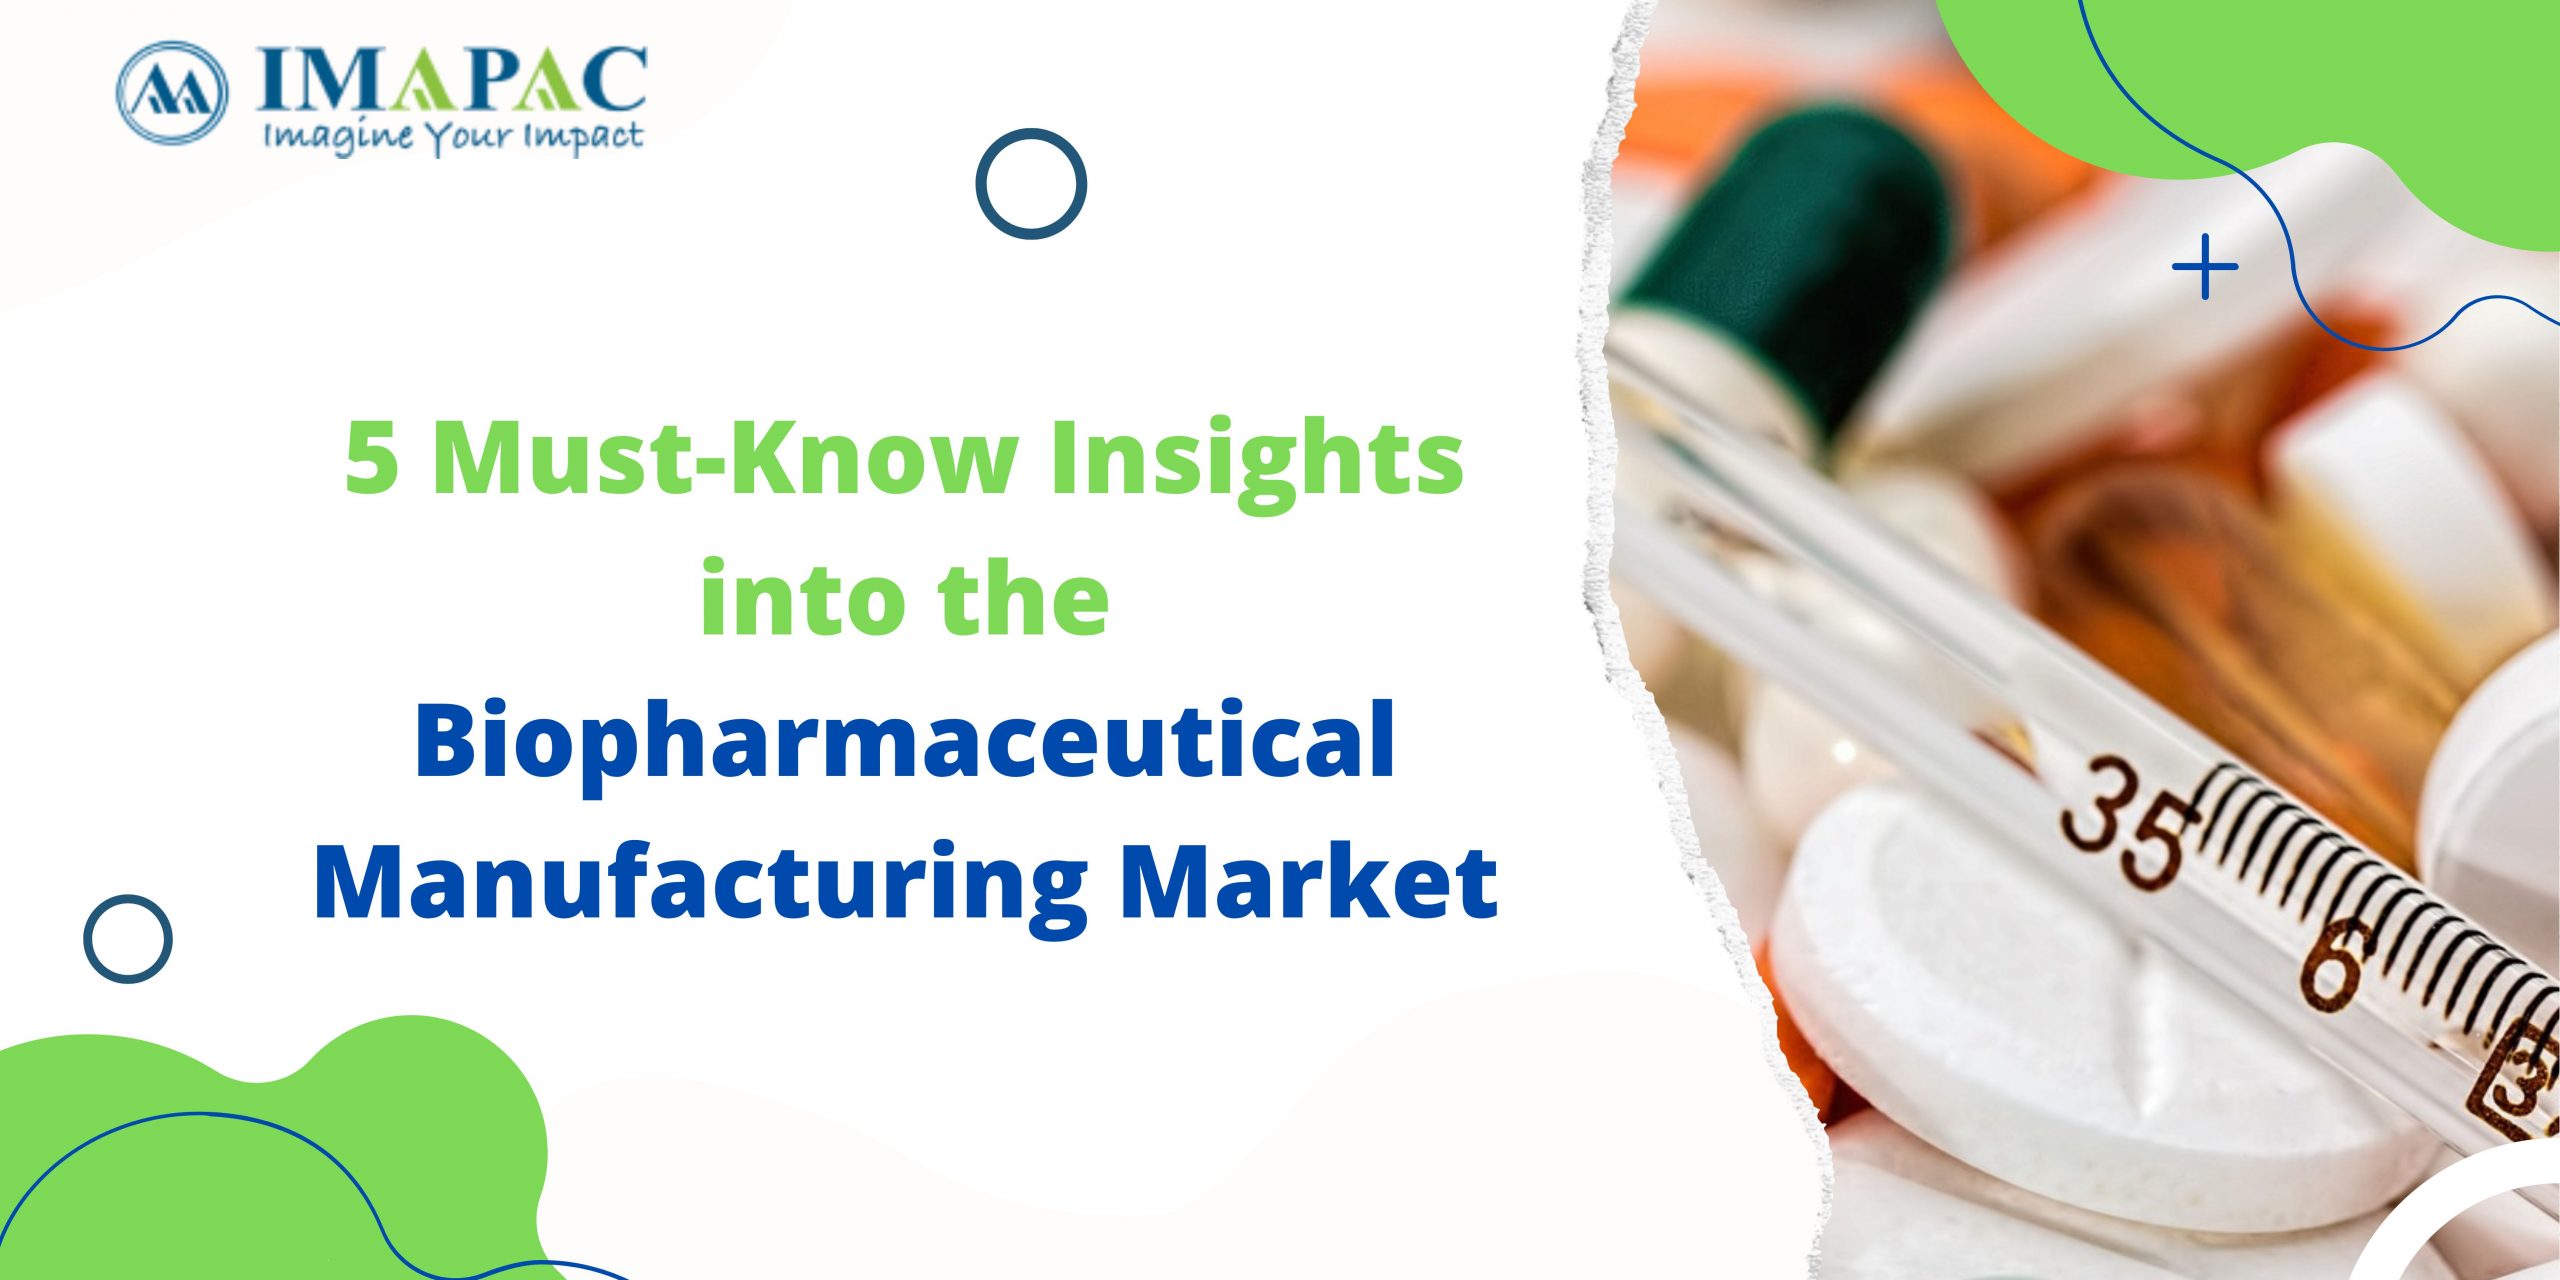 5 Must-Know Insights into the Biopharmaceutical Manufacturing Market